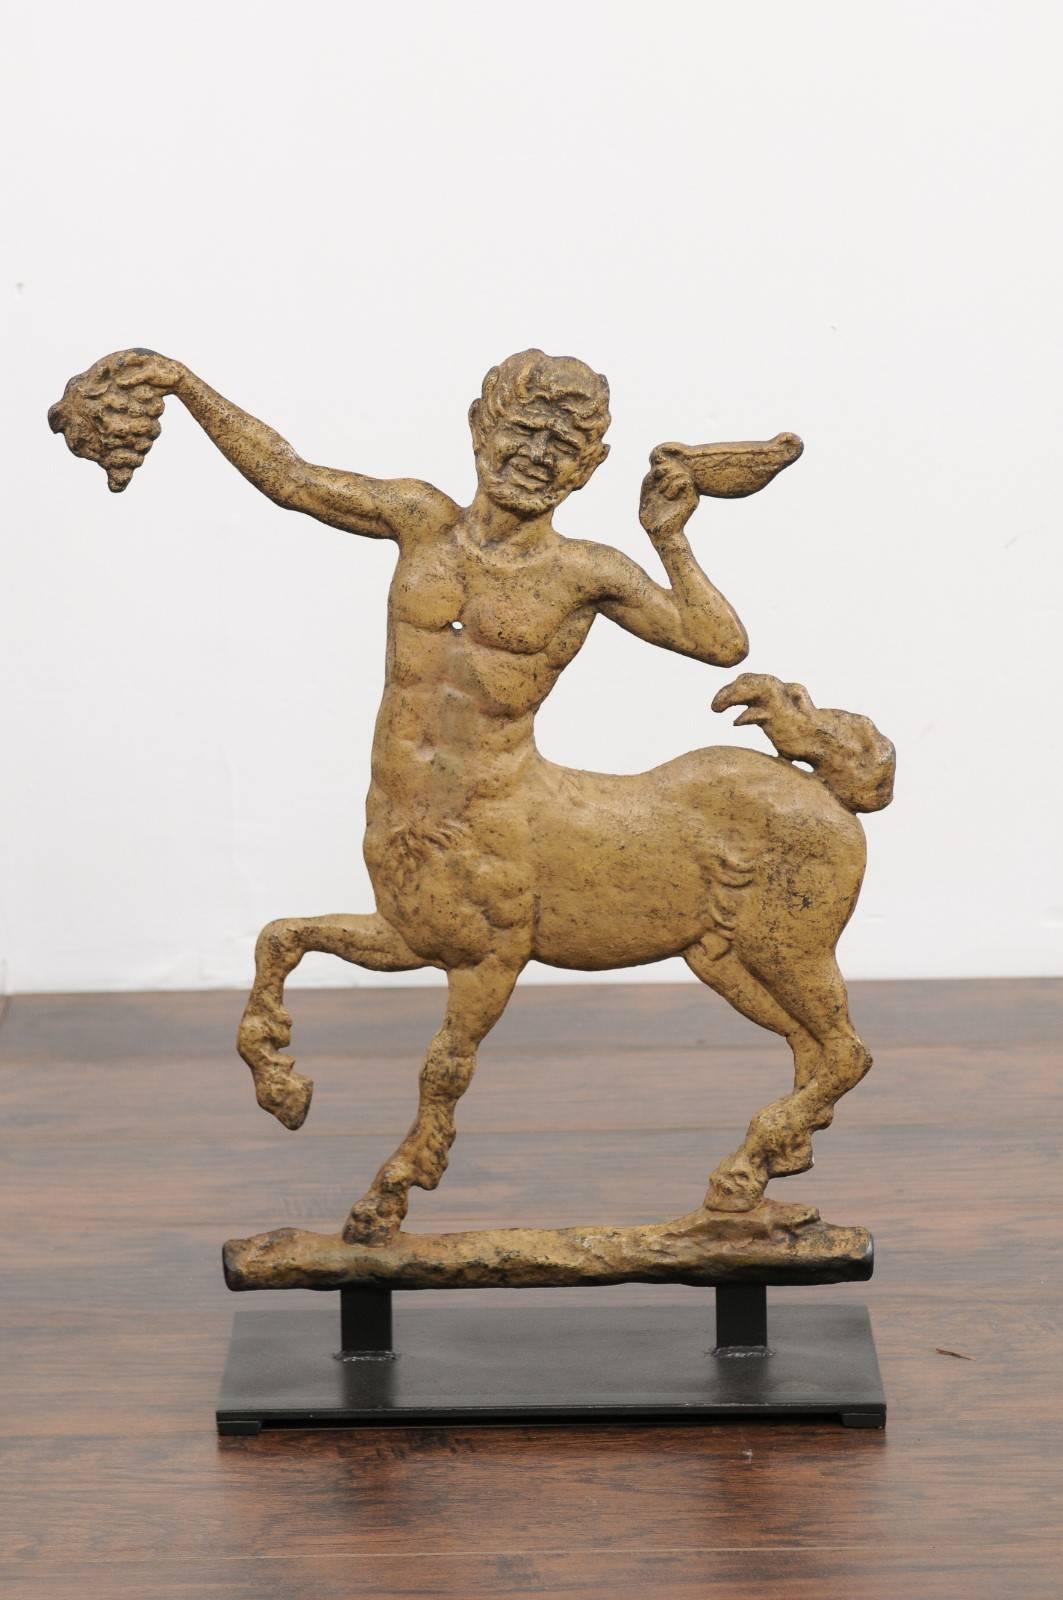 A French painted iron centaur sculpture from the early 20th century, mounted on a custom base. This French decorative object features a theme borrowed from the Greco-Roman mythology, a centaur, half-man half-horse, holding with pride grapes in his